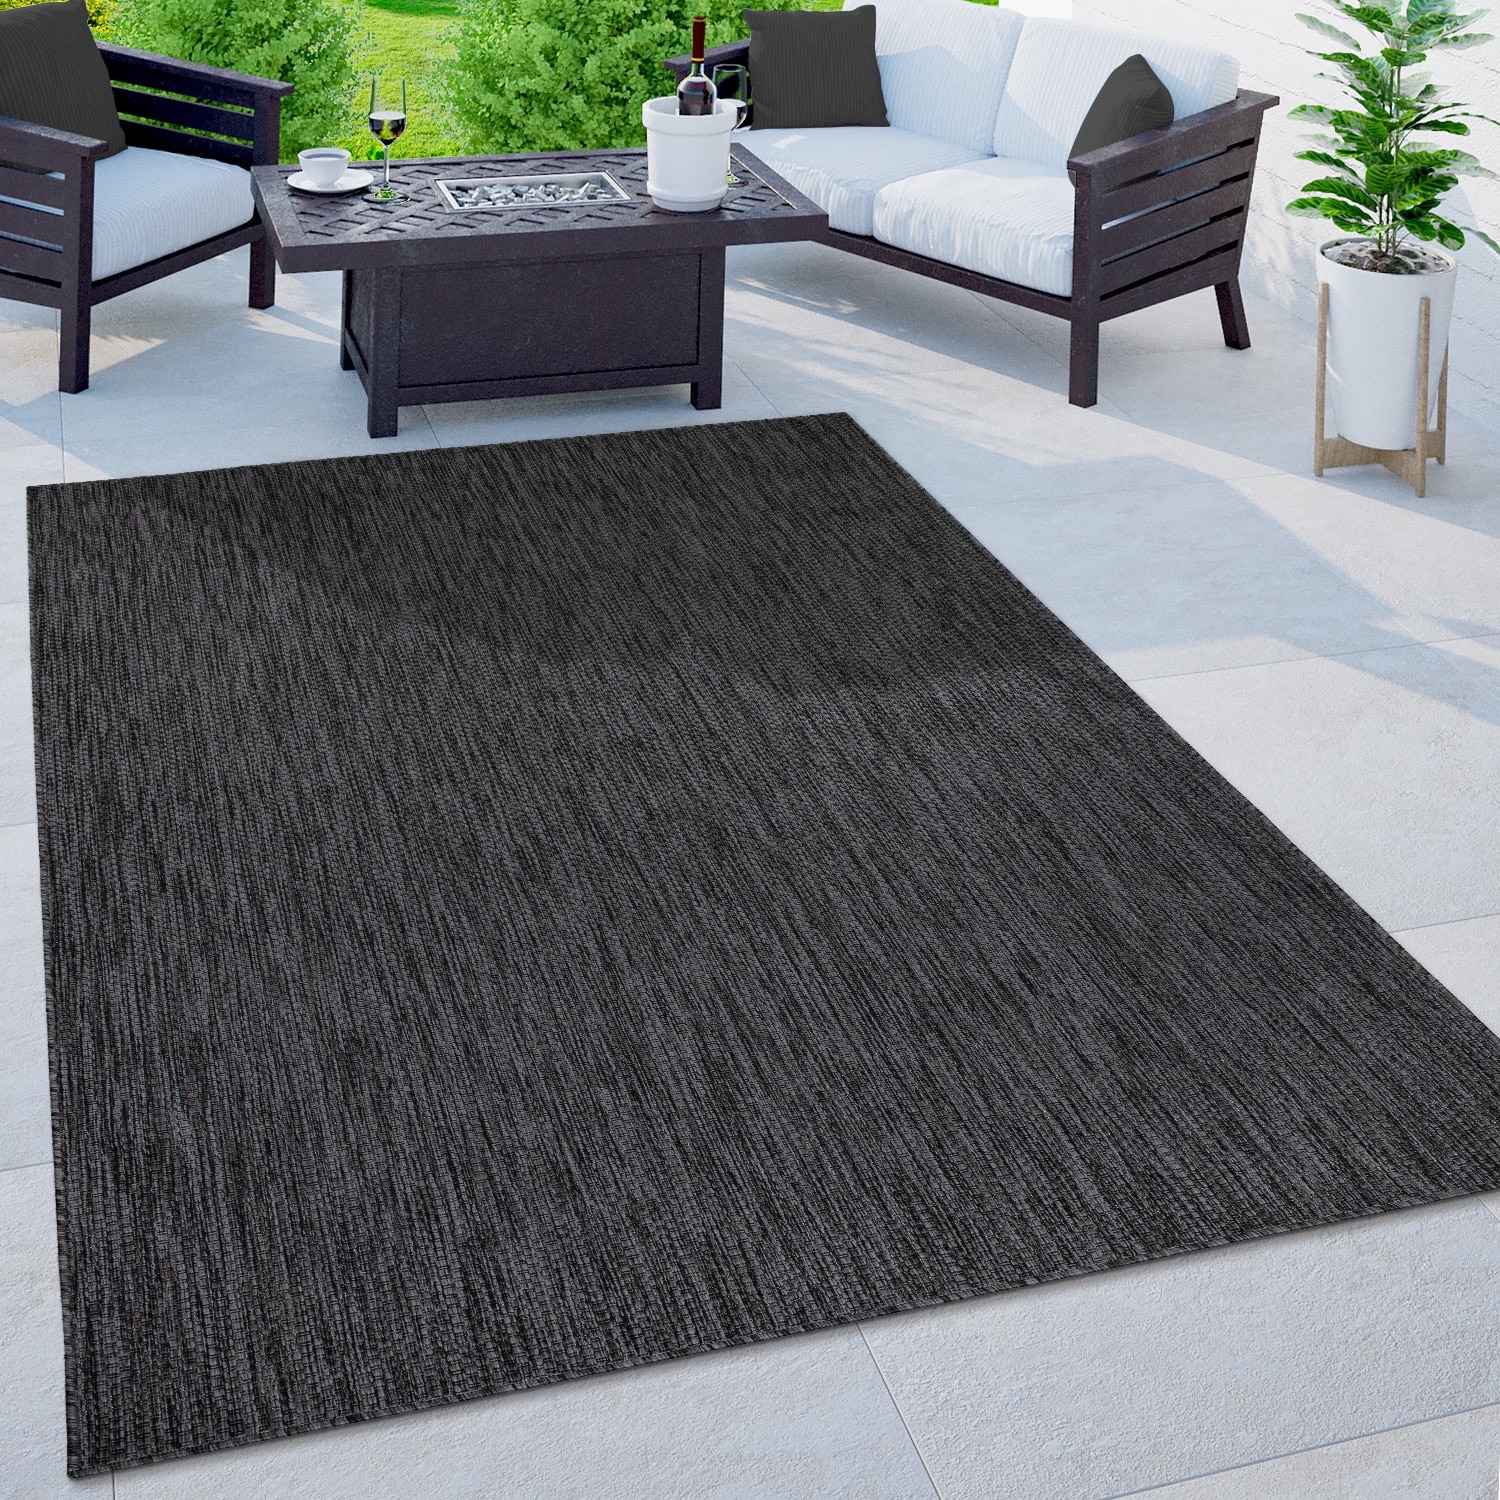 https://ak1.ostkcdn.com/images/products/is/images/direct/31aab7c341c0d413fb225cbc8444f061c45e84cd/Solid-Outdoor-Rug-Waterproof-for-Patio-in-different-plain-colors.jpg